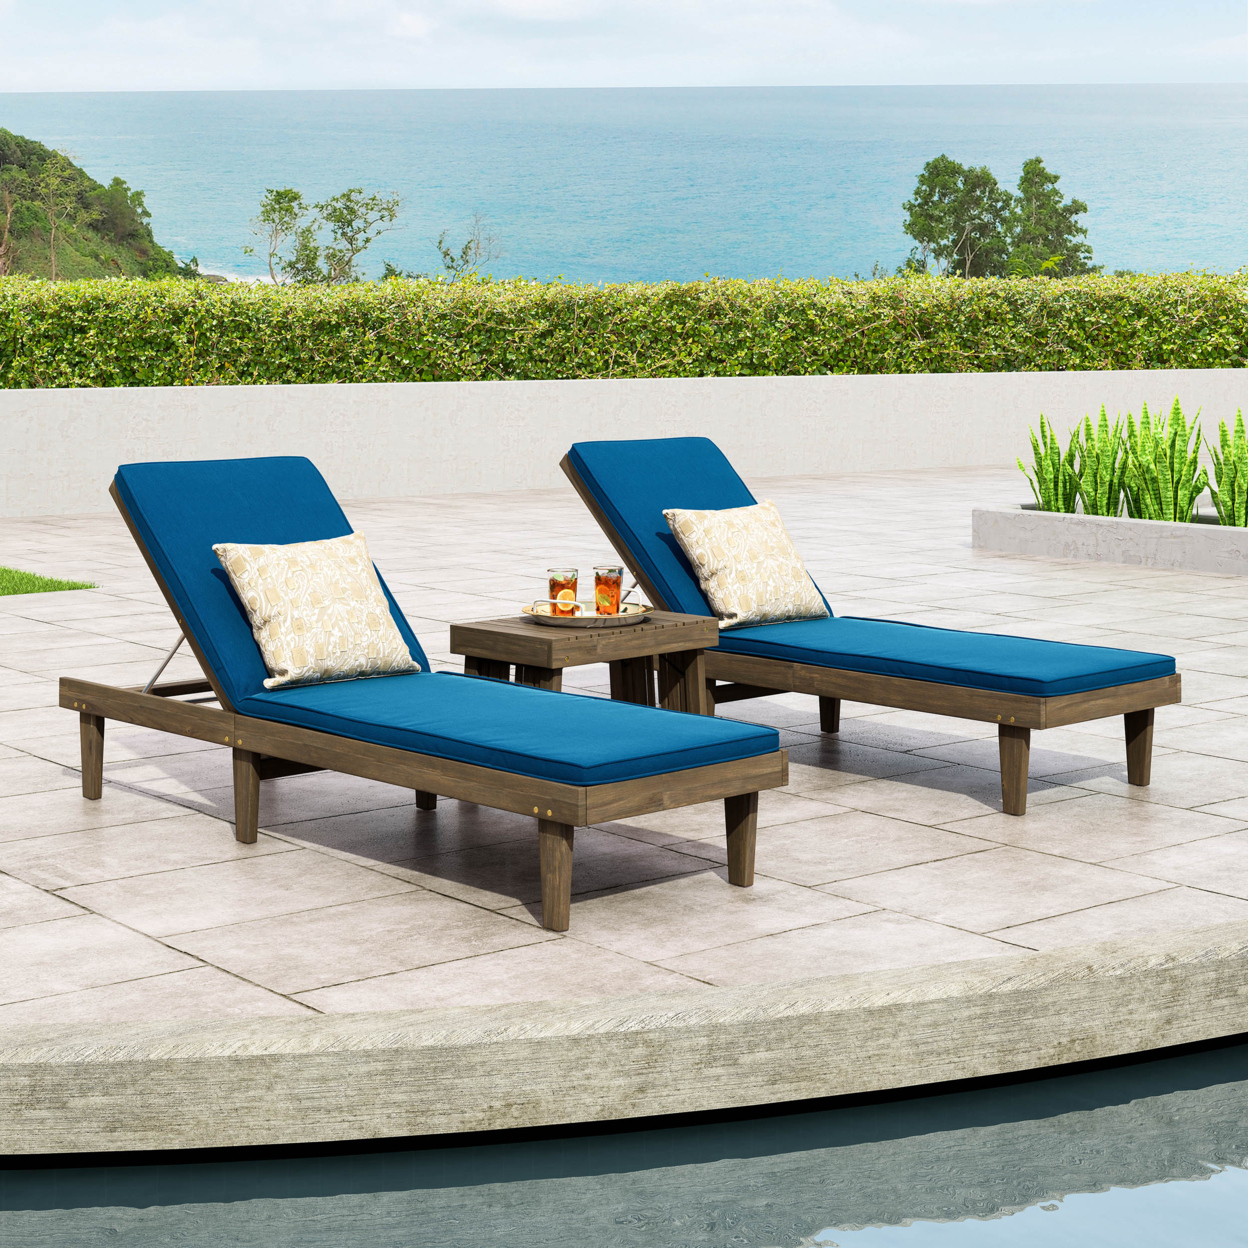 Addisyn Outdoor Acacia Wood 3 Piece Chaise Lounge Set With Water-Resistant Cushions - Gray/blue